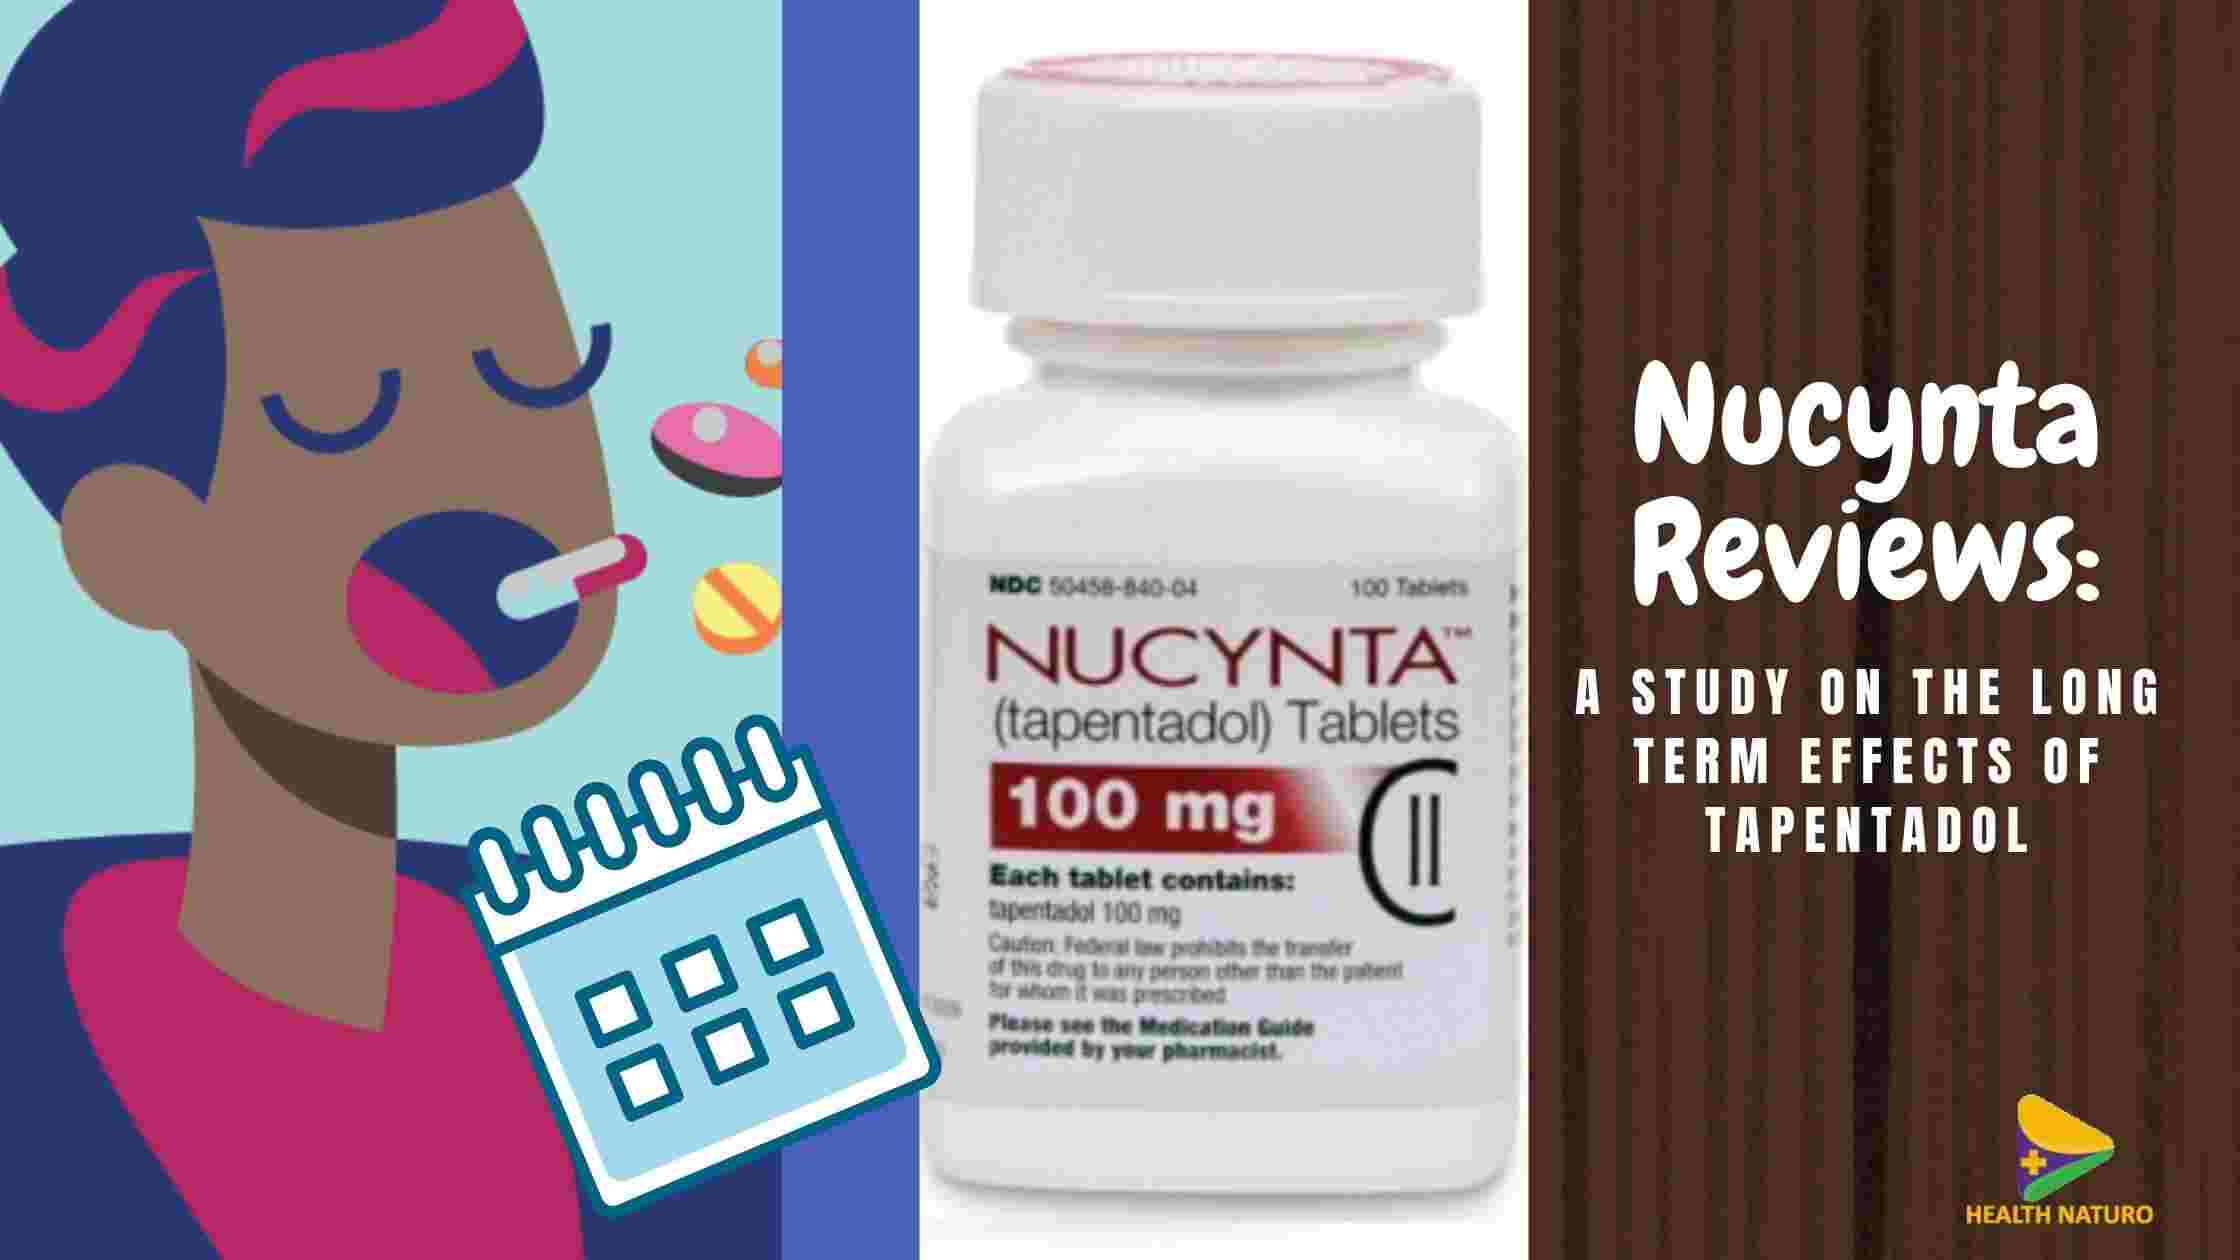 Nucynta Reviews: A study on the long term effects of Tapentadol